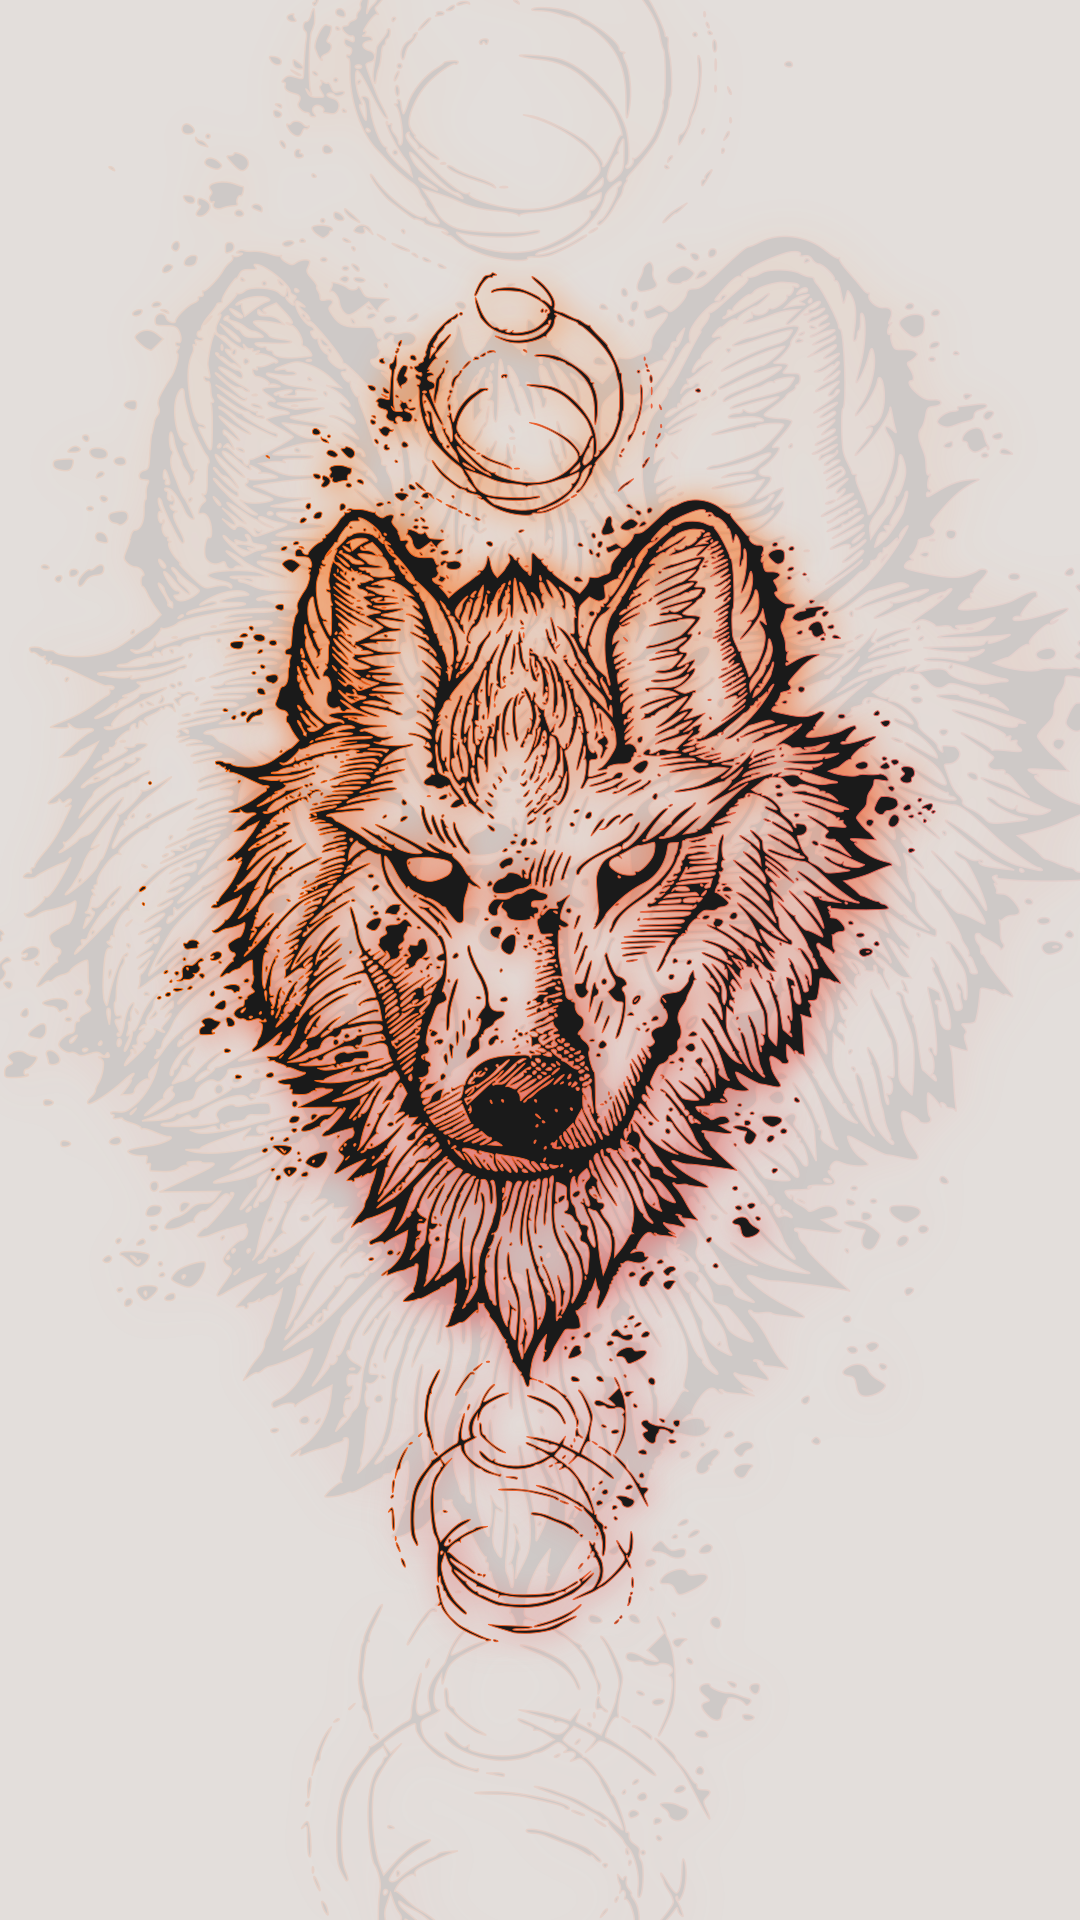 General 1080x1920 wolf drawing